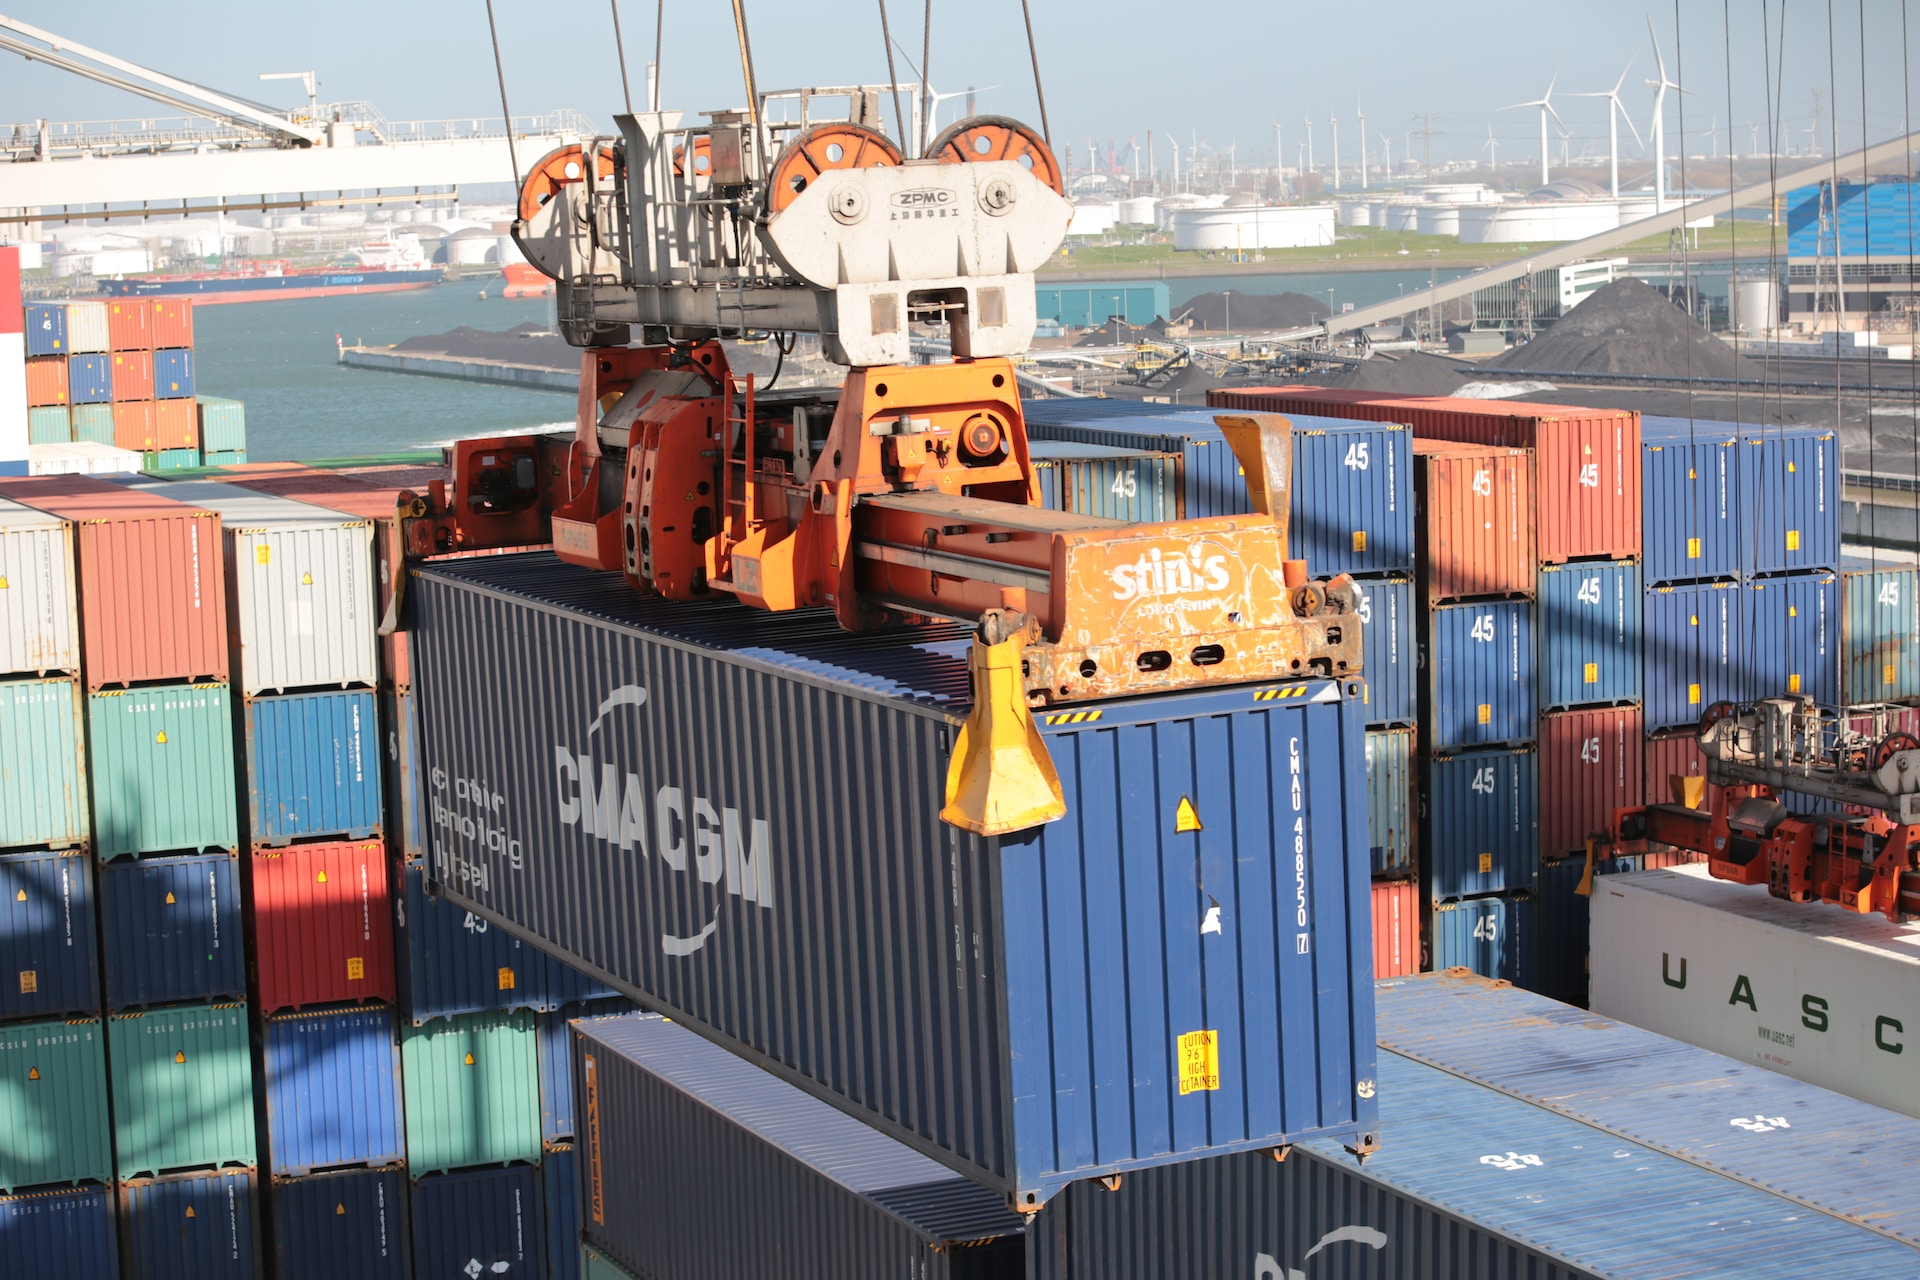 Understanding Cargo Insurance. From the International Trade Council. Learn about importing and exporting with further education programs from the International Trade Council.